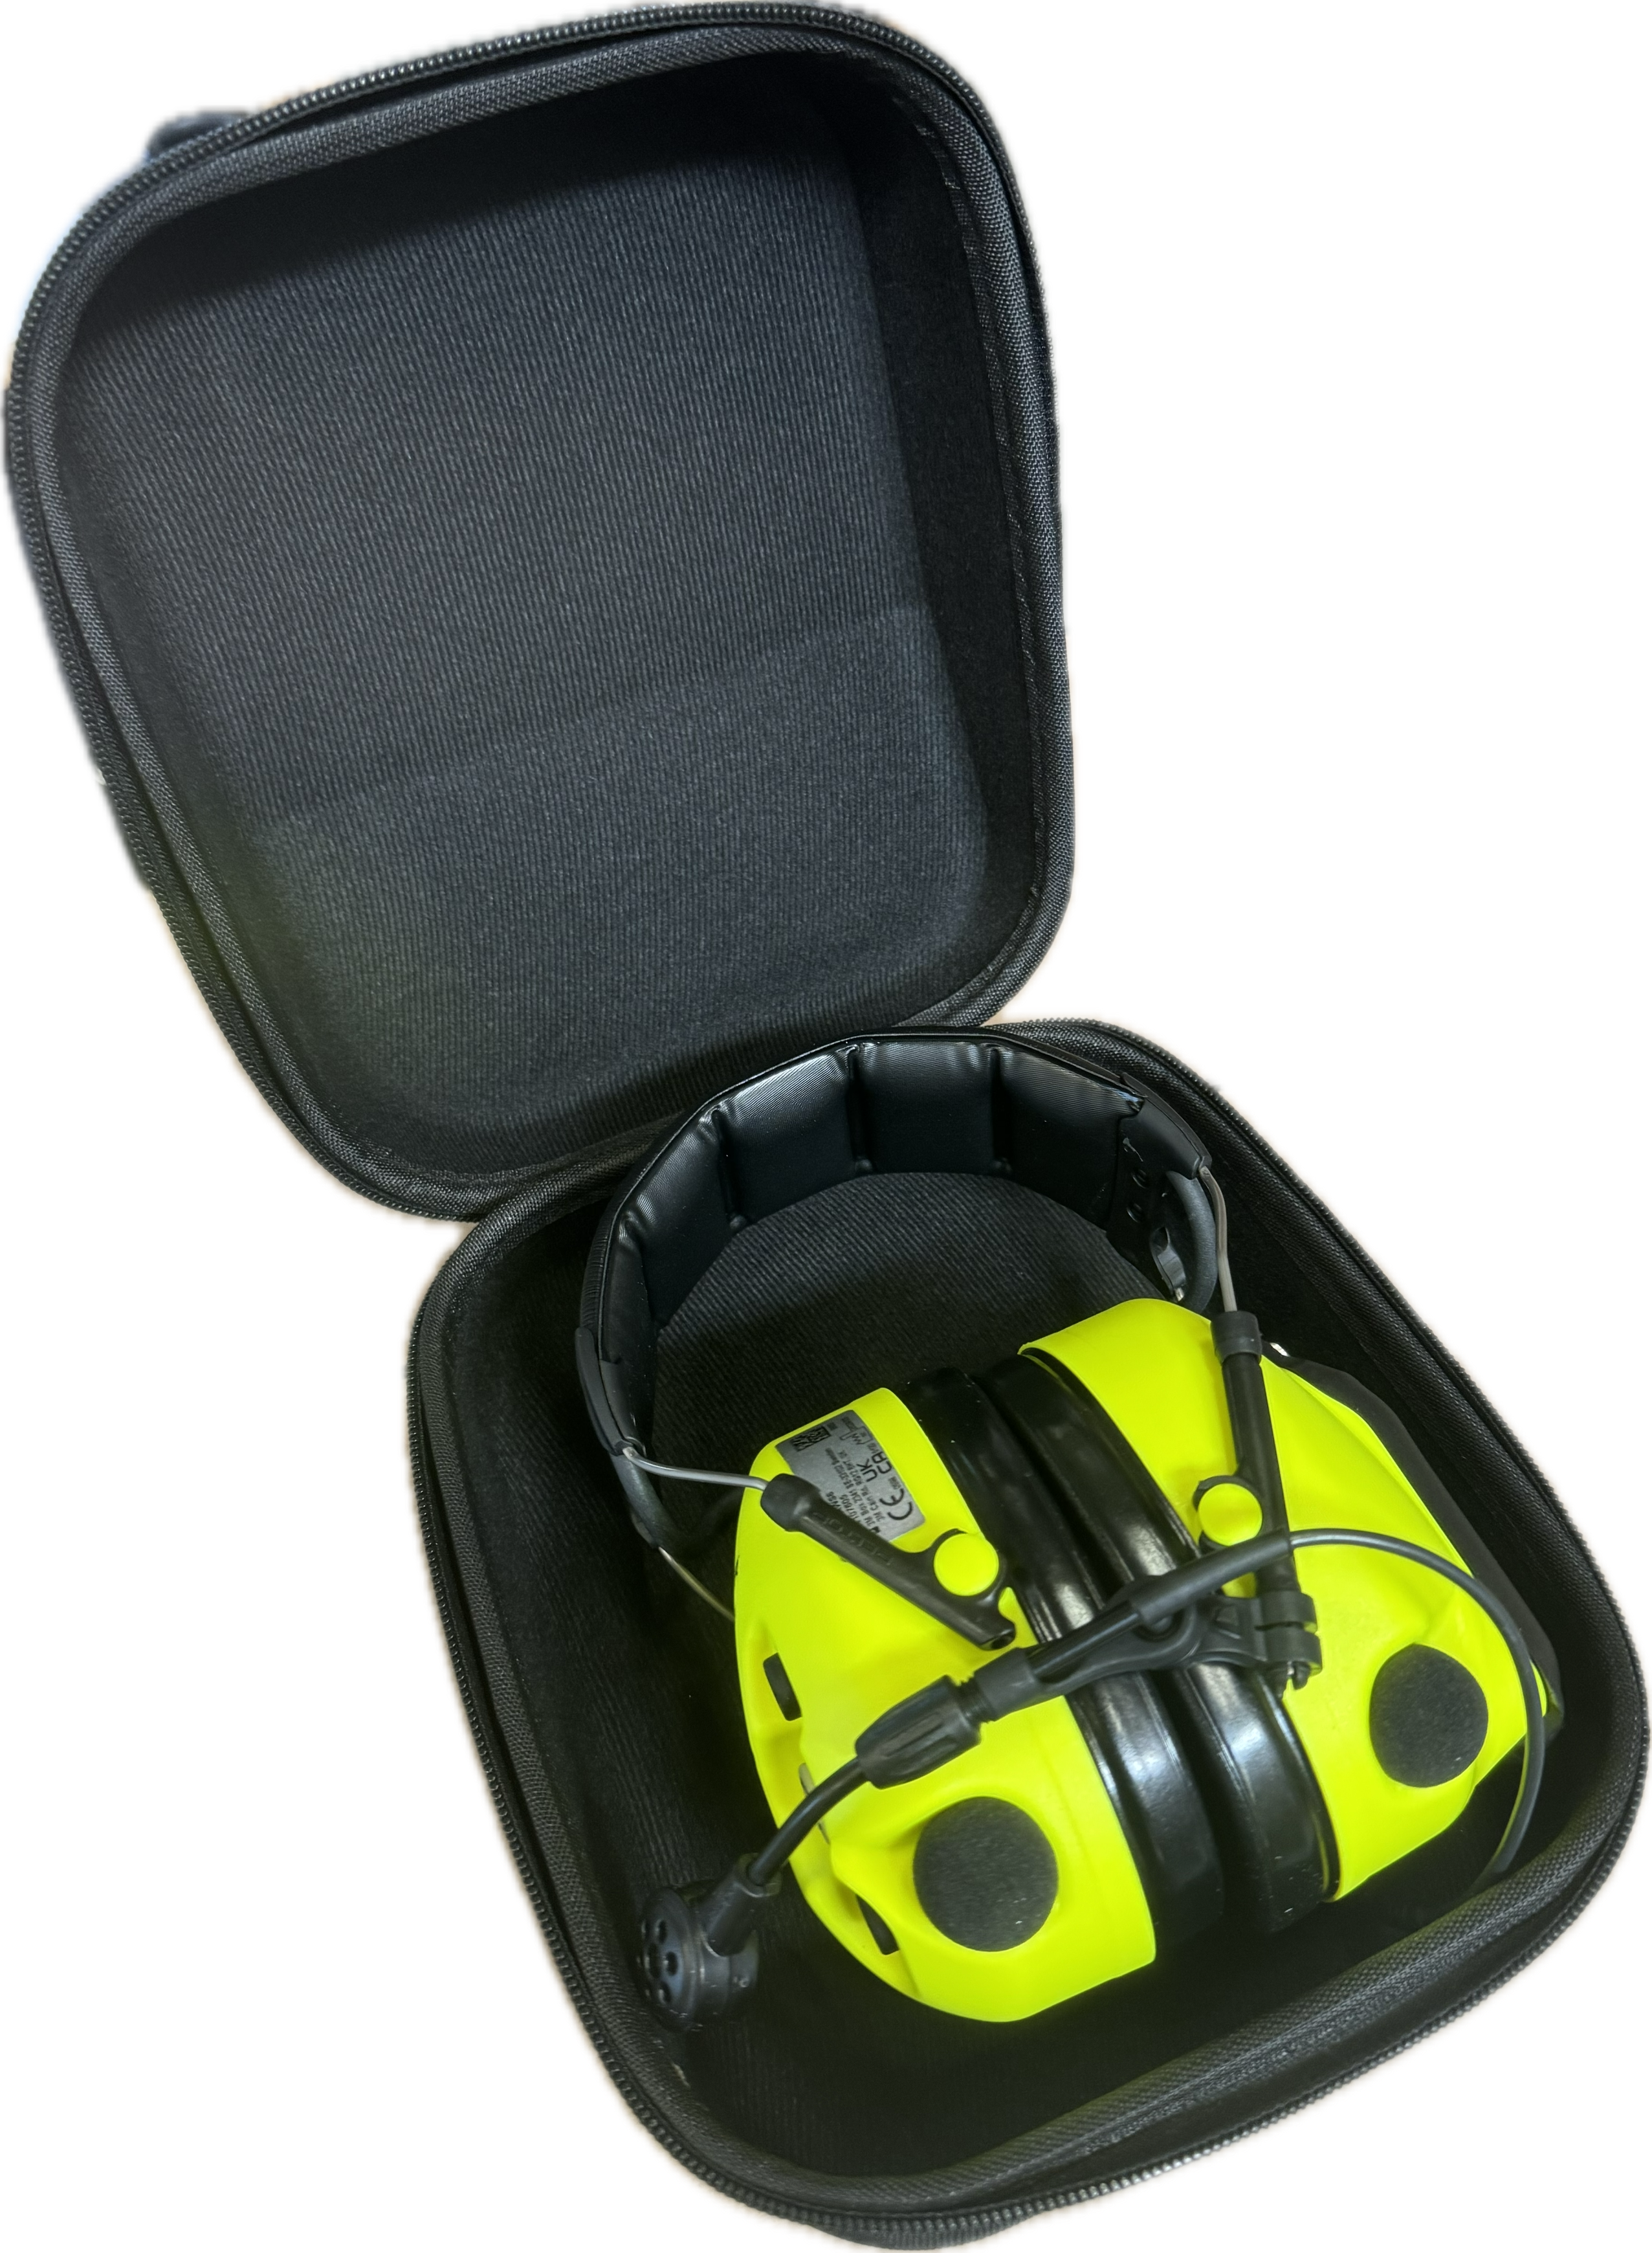 SKS storage box for 3M Peltor hearing protection